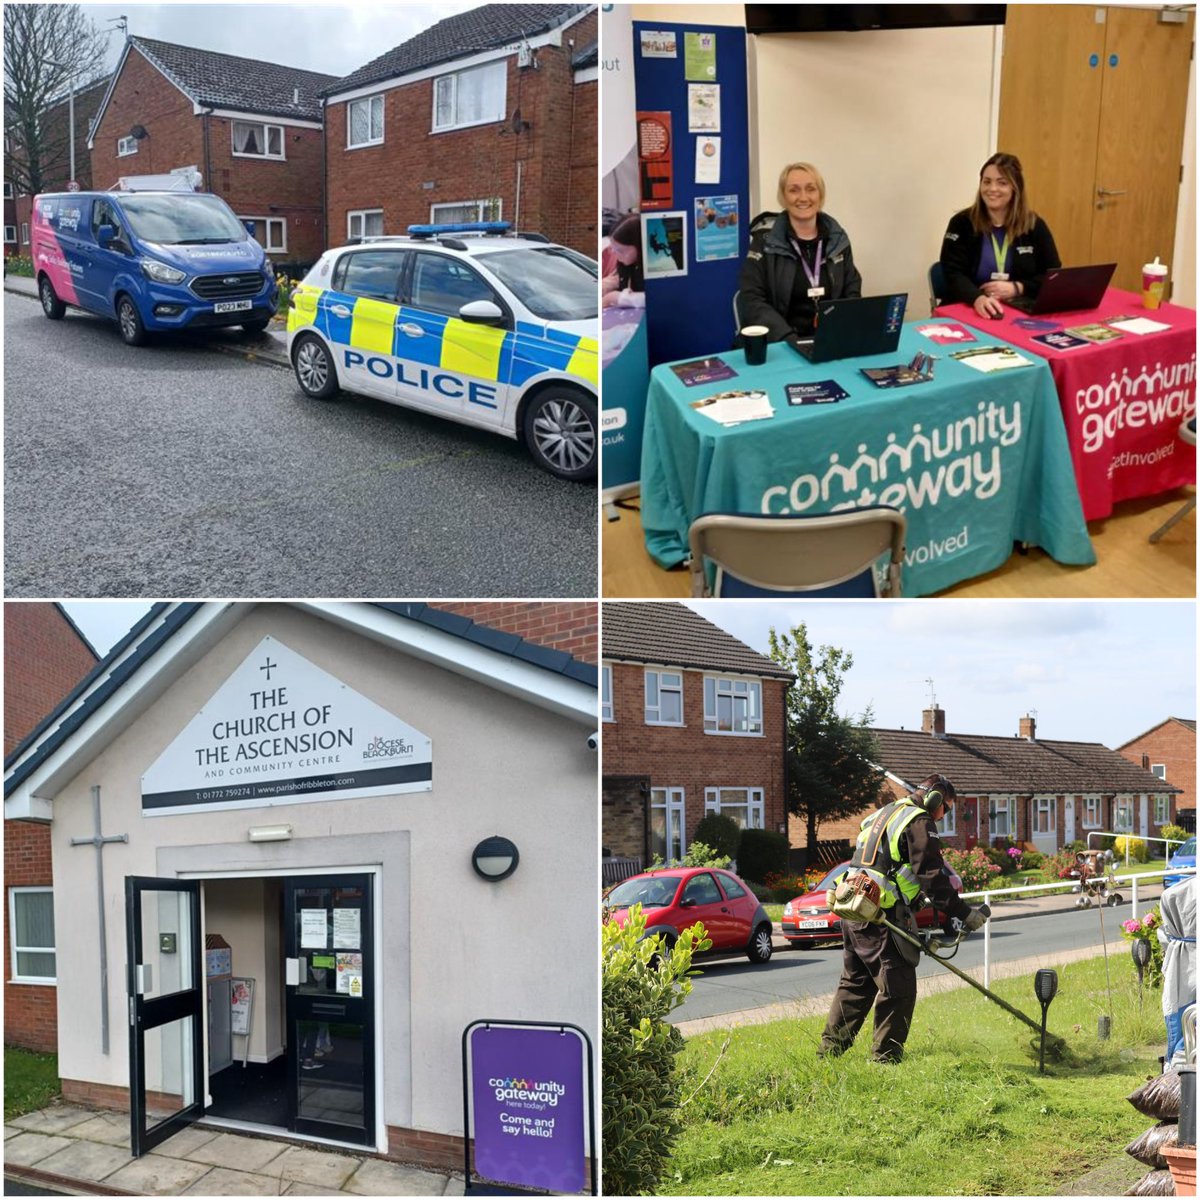 This week has seen our teams out in your communities – at two Gateway2You sessions, a day of action in the city centre and dodging the raindrops to get our grass-cutting season underway ☔ #getinvolved #communityengagement #socialhousing